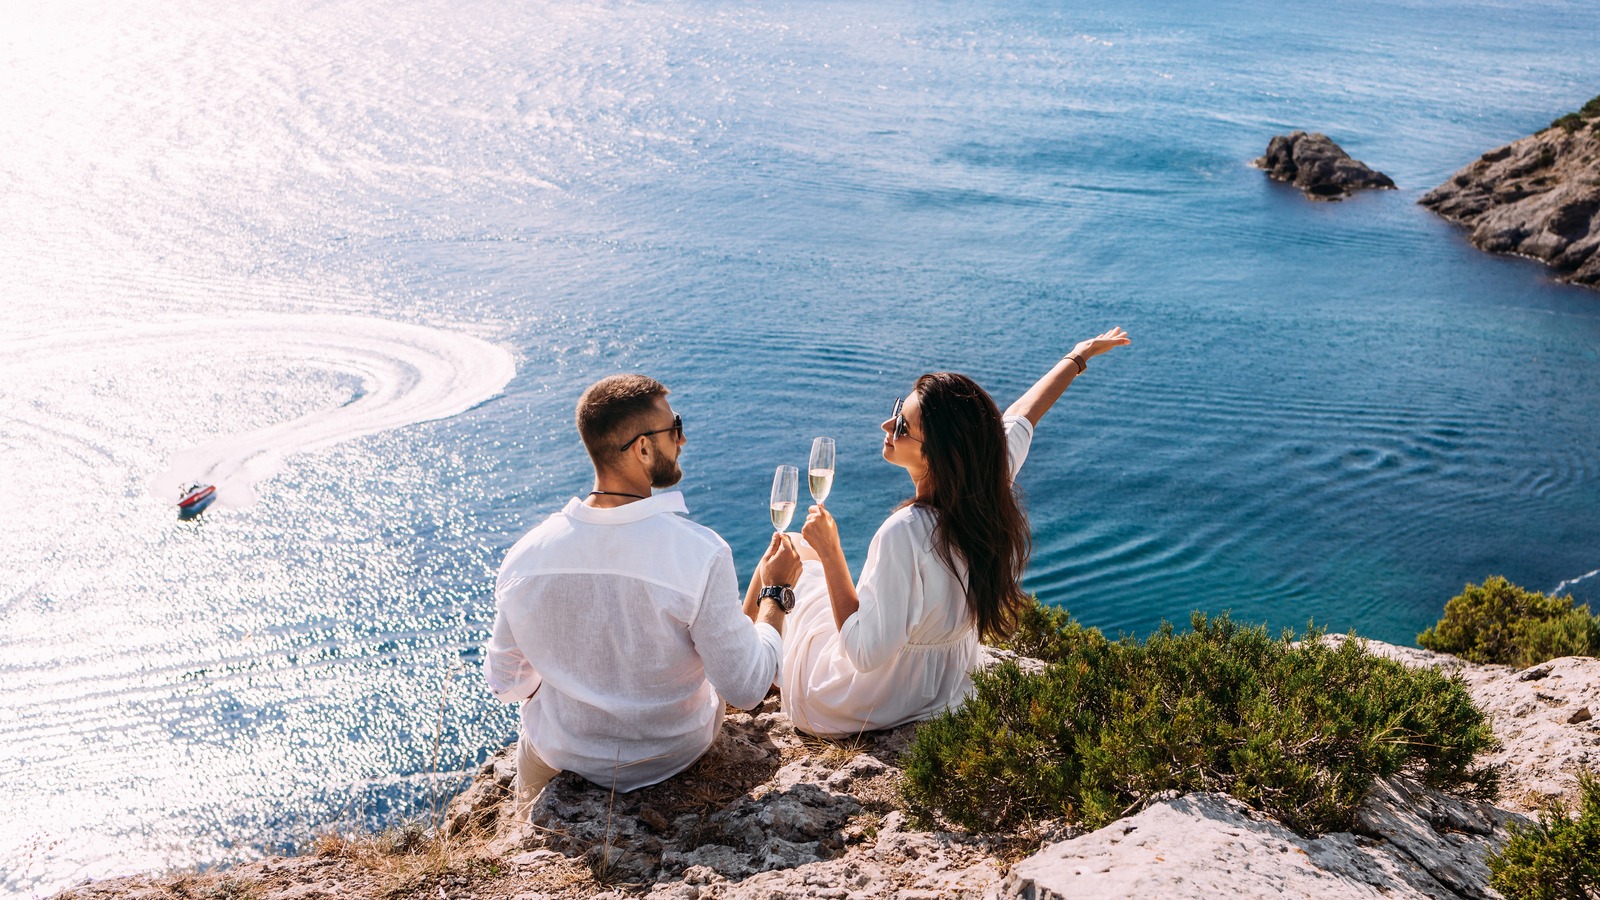 5 Tips To Get Started Planning A Dream Honeymoon